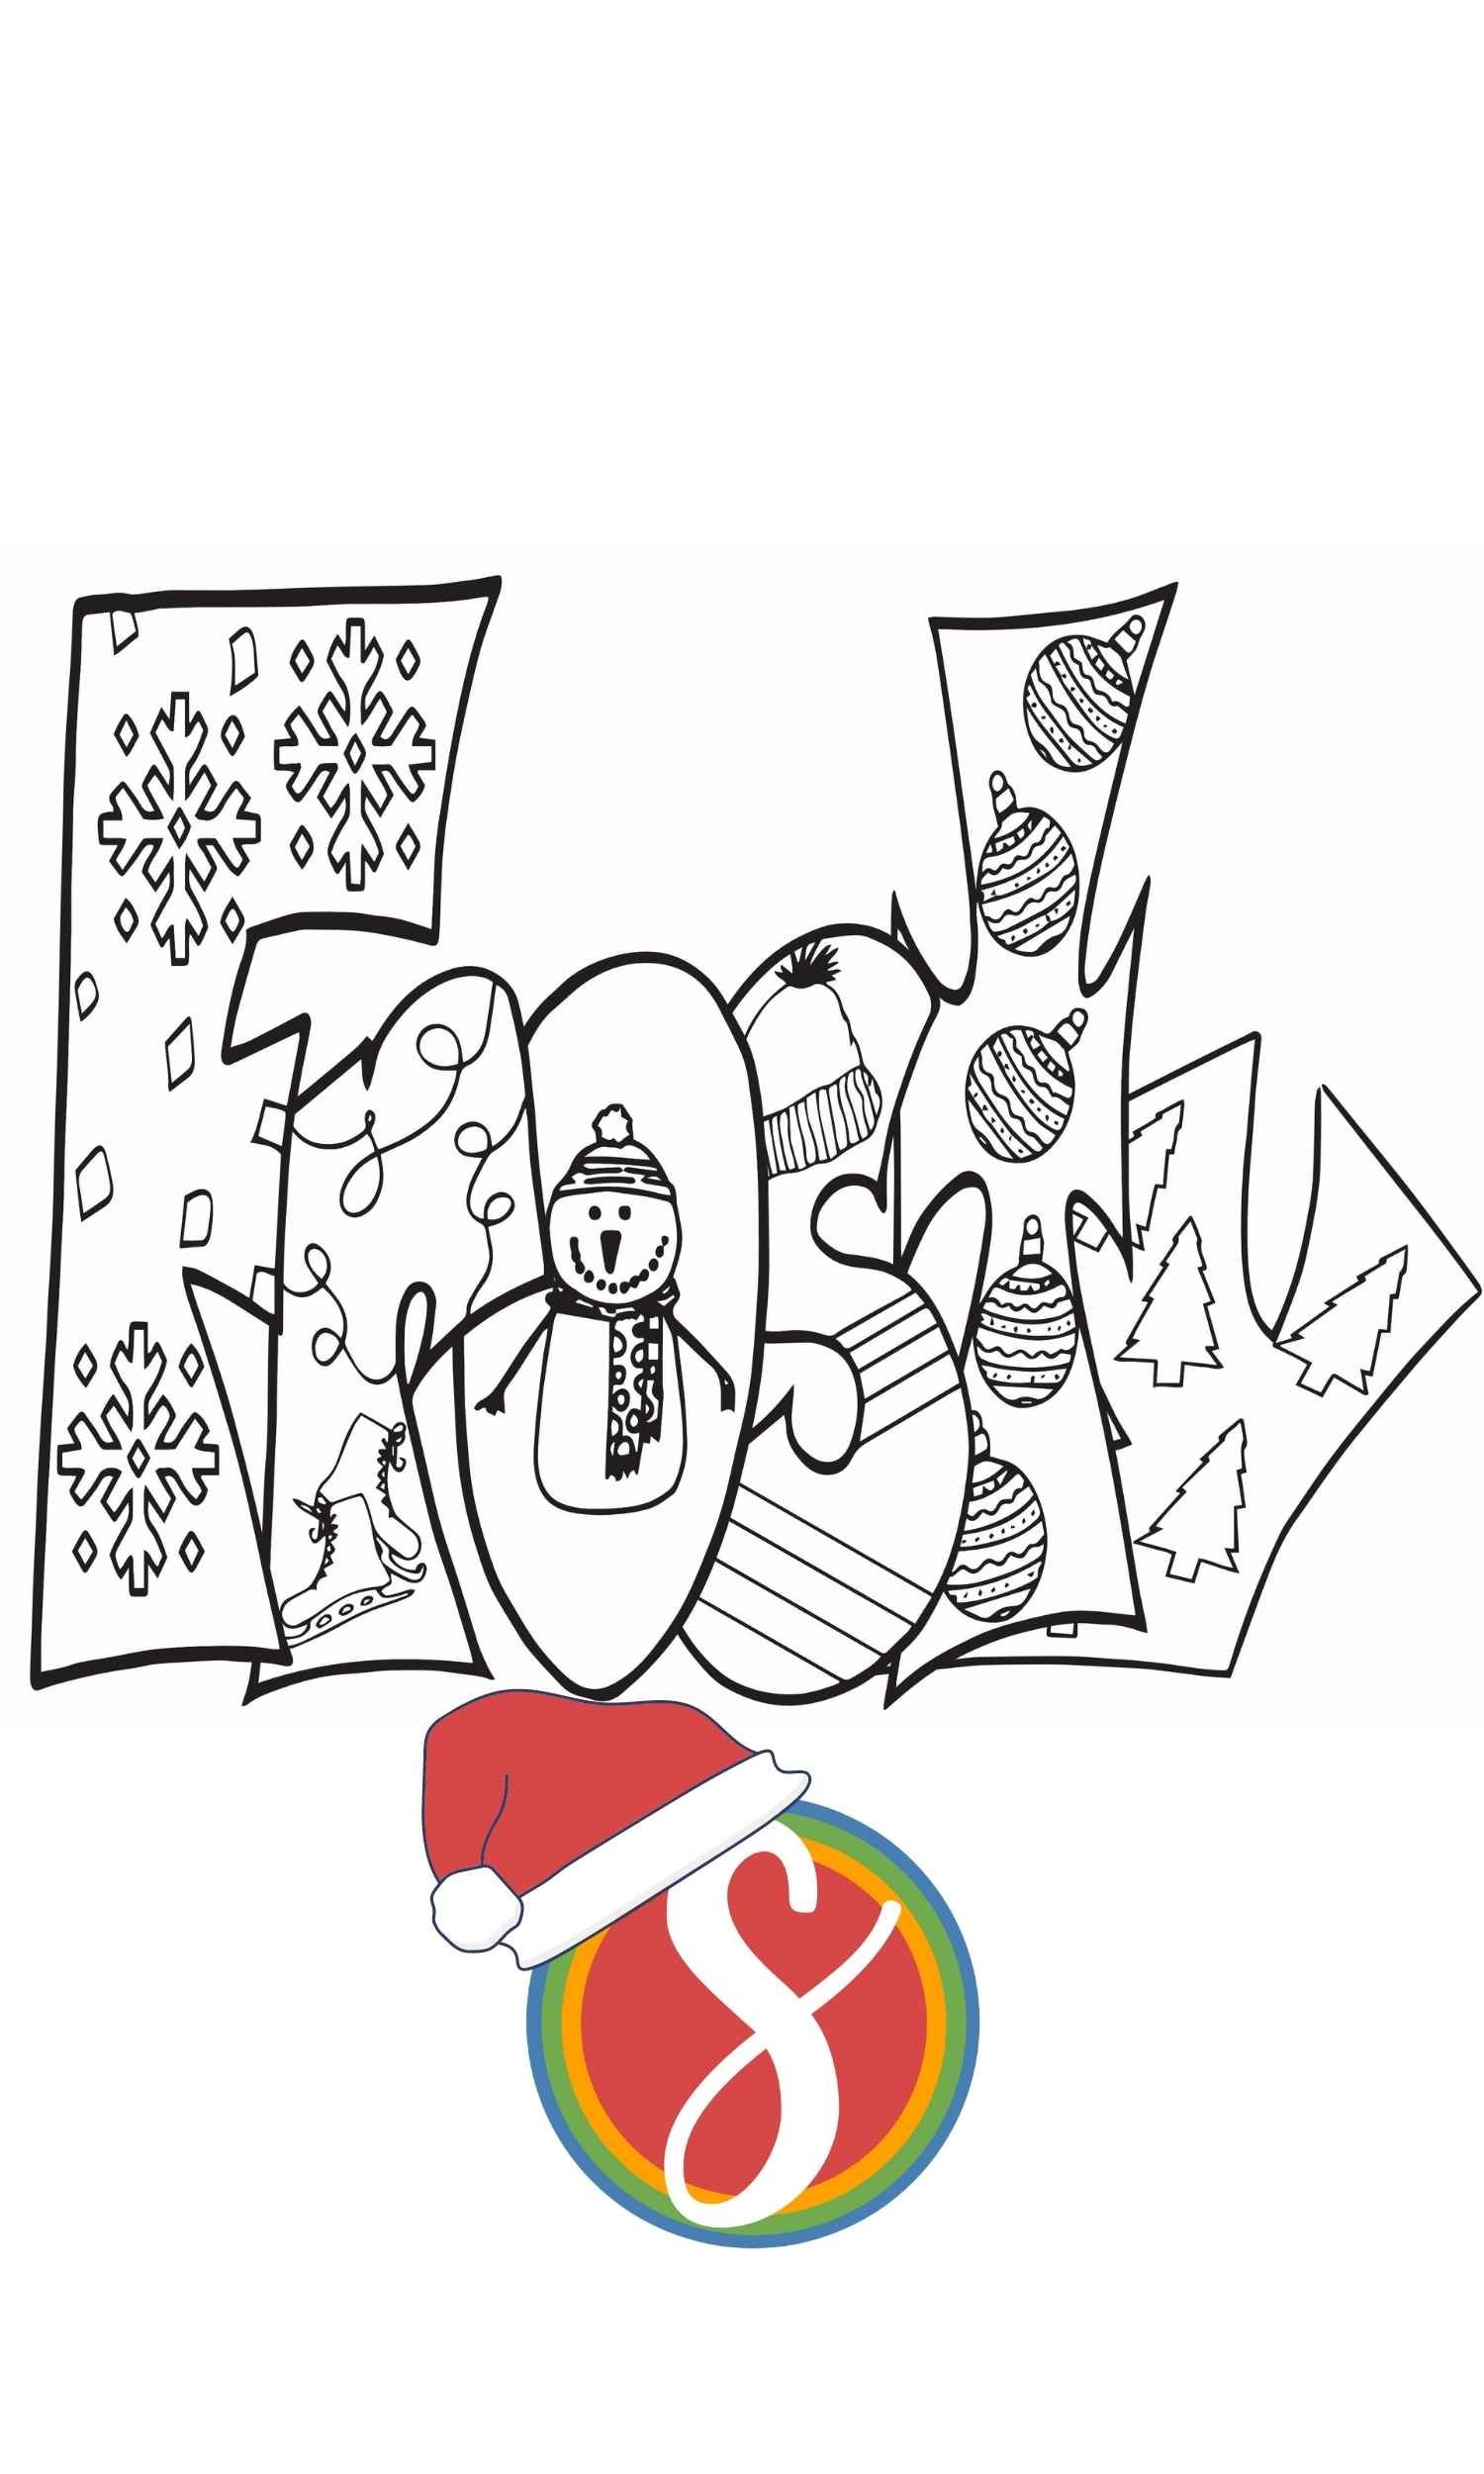 bubble letters "Frosty" with Christmas doodles inside to color